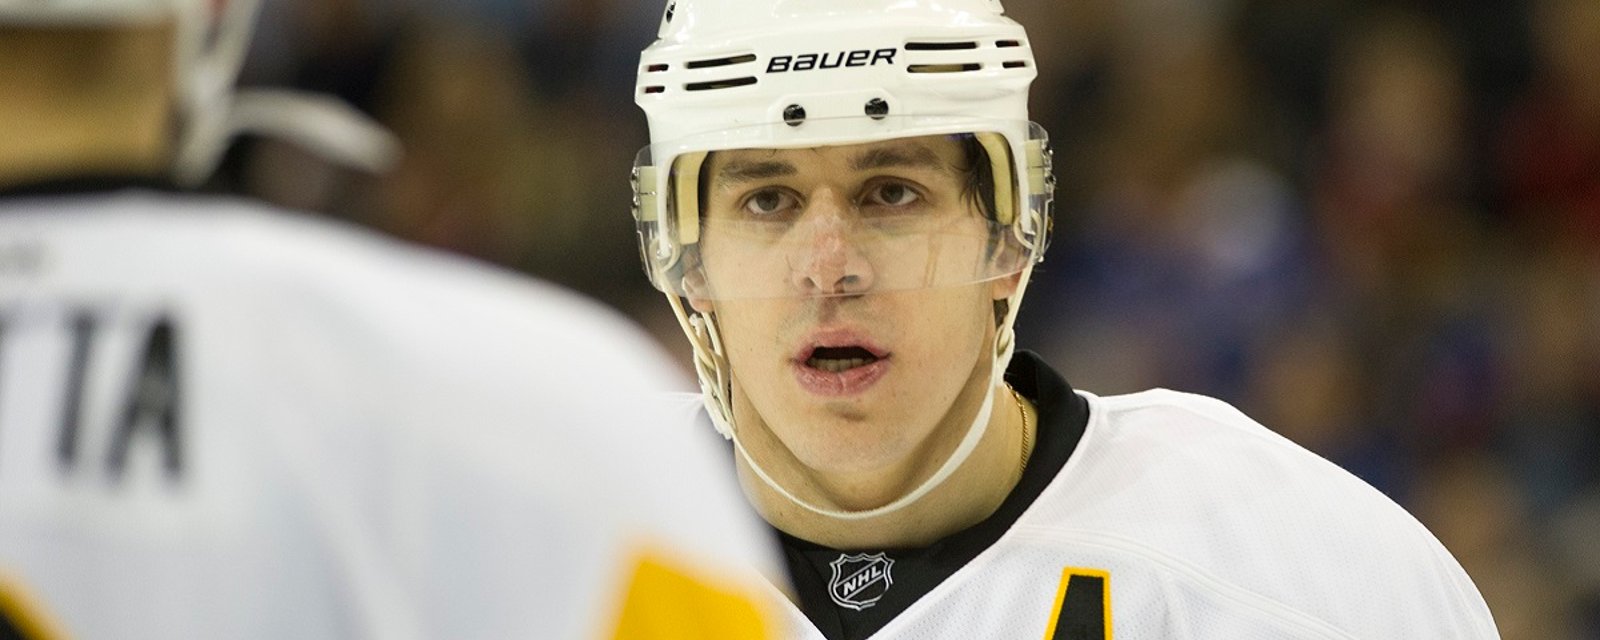 Some positive signs from Evgeni Malkin in practice today.